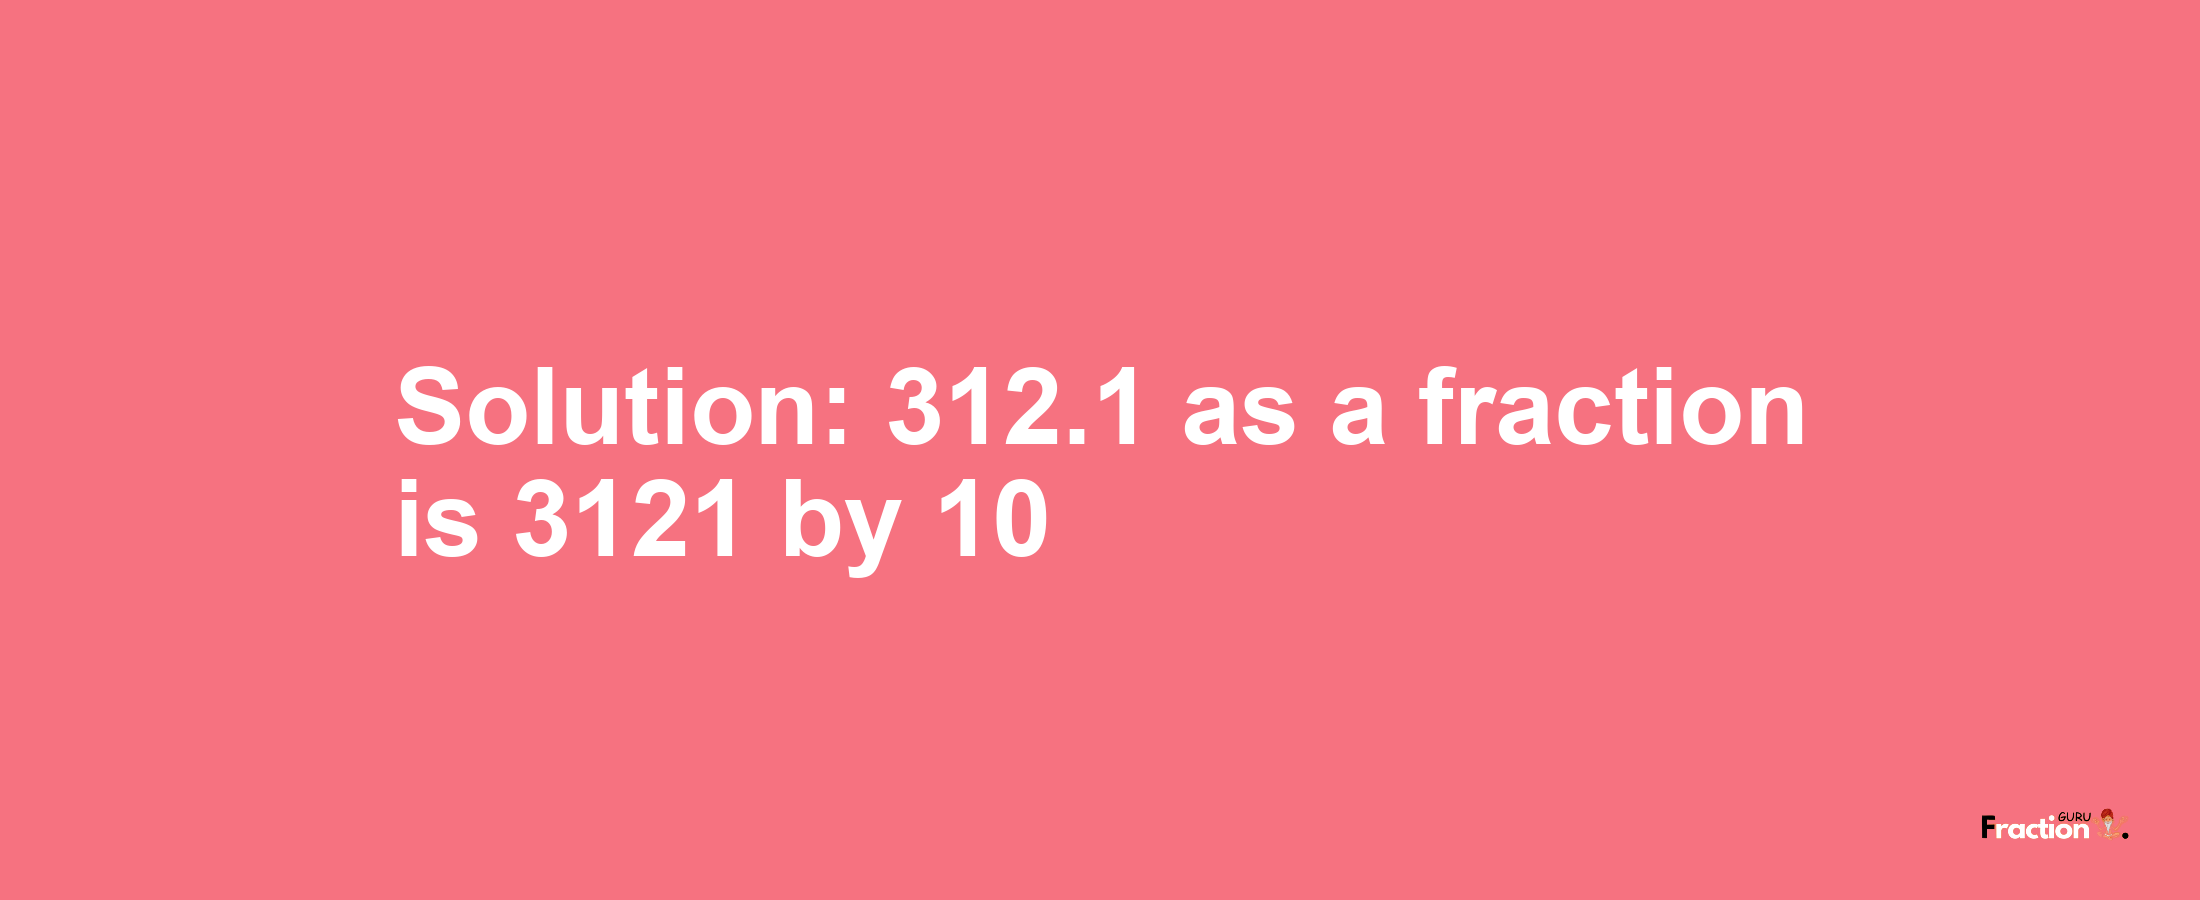 Solution:312.1 as a fraction is 3121/10